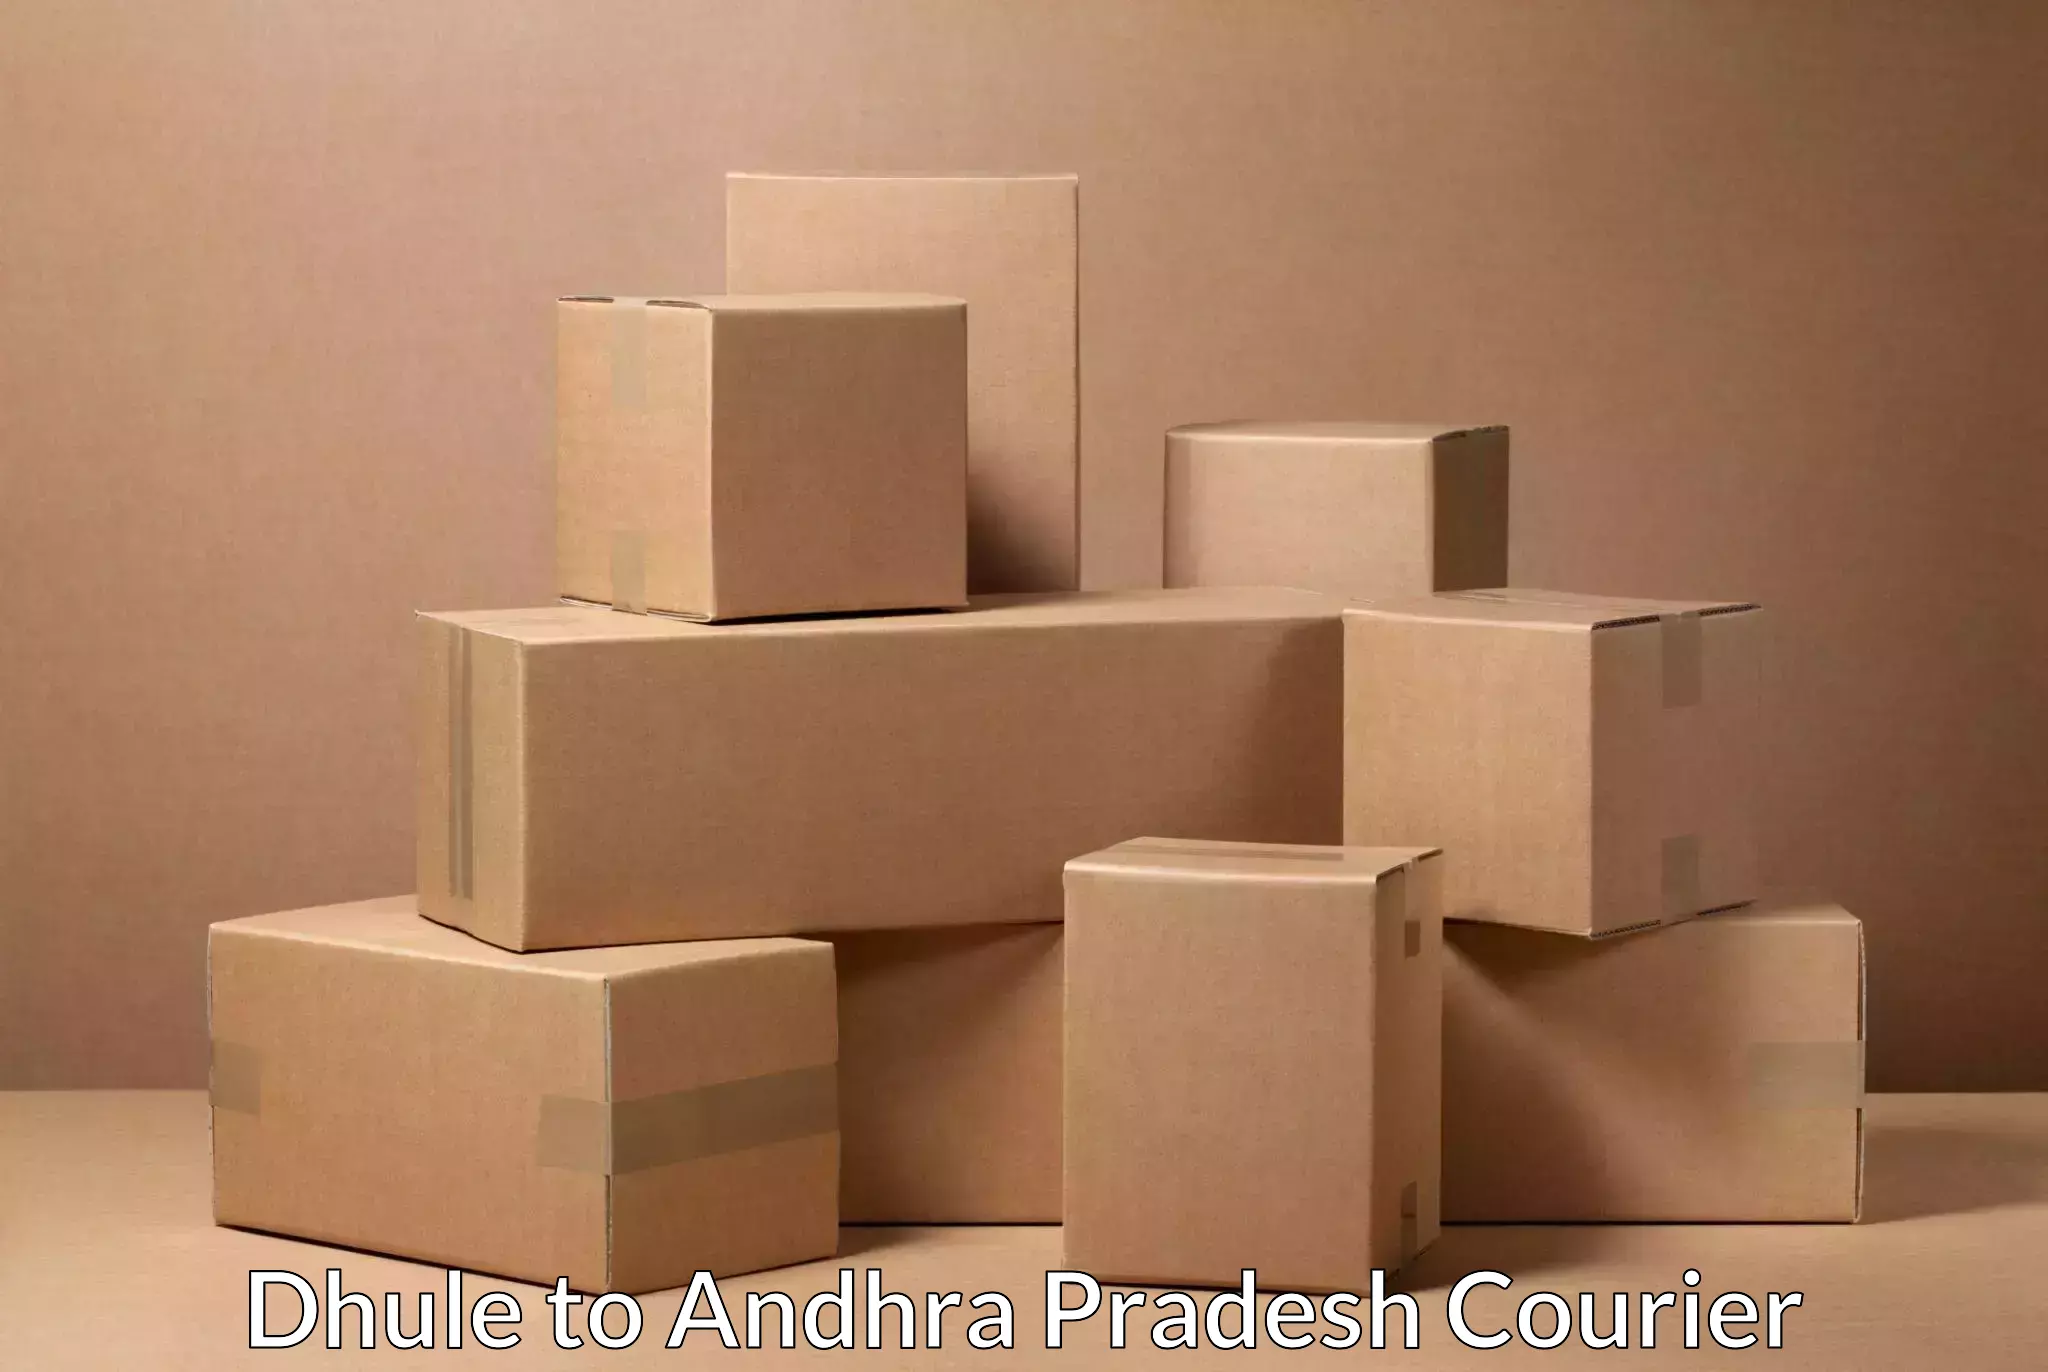 24-hour courier services in Dhule to Udayagiri